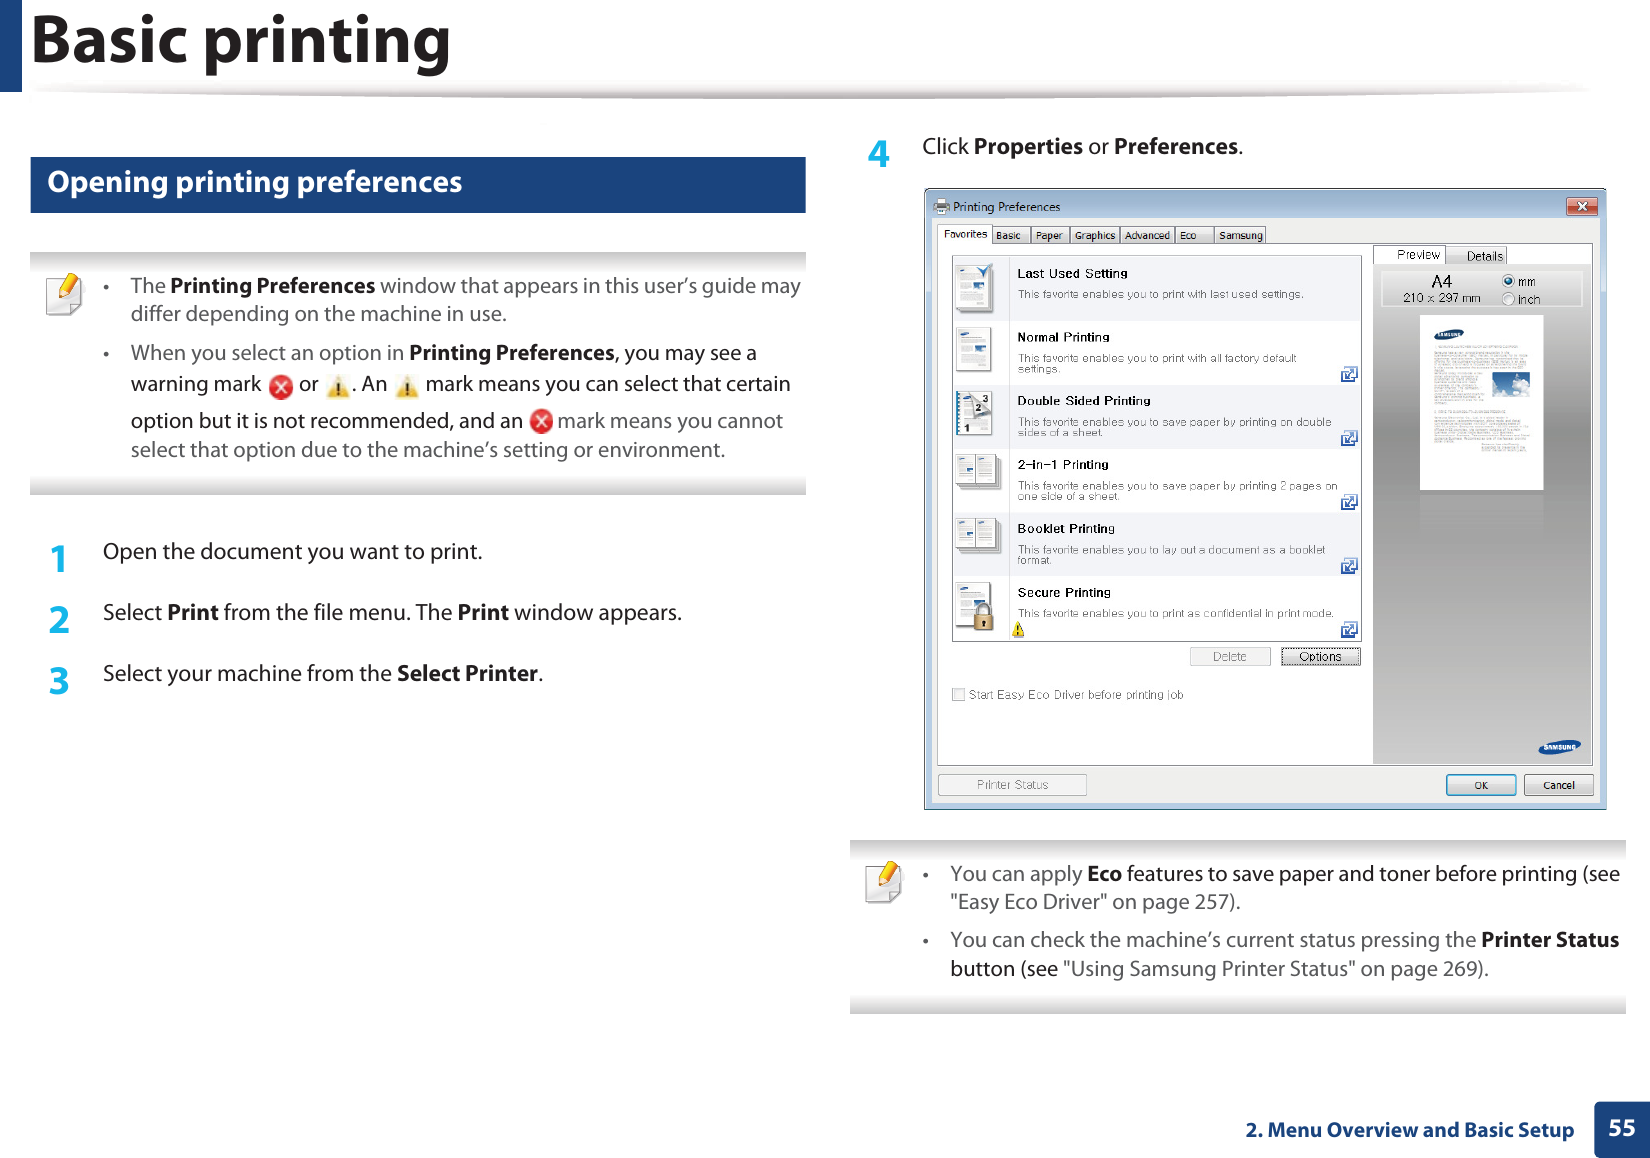 Basic printing552. Menu Overview and Basic Setup11 Opening printing preferences • The Printing Preferences window that appears in this user’s guide may differ depending on the machine in use. • When you select an option in Printing Preferences, you may see a warning mark   or  . An   mark means you can select that certain option but it is not recommended, and an   mark means you cannot select that option due to the machine’s setting or environment. 1Open the document you want to print.2  Select Print from the file menu. The Print window appears. 3  Select your machine from the Select Printer. 4  Click Properties or Preferences.  • You can apply Eco features to save paper and toner before printing (see &quot;Easy Eco Driver&quot; on page 257).• You can check the machine’s current status pressing the Printer Status button (see &quot;Using Samsung Printer Status&quot; on page 269). 